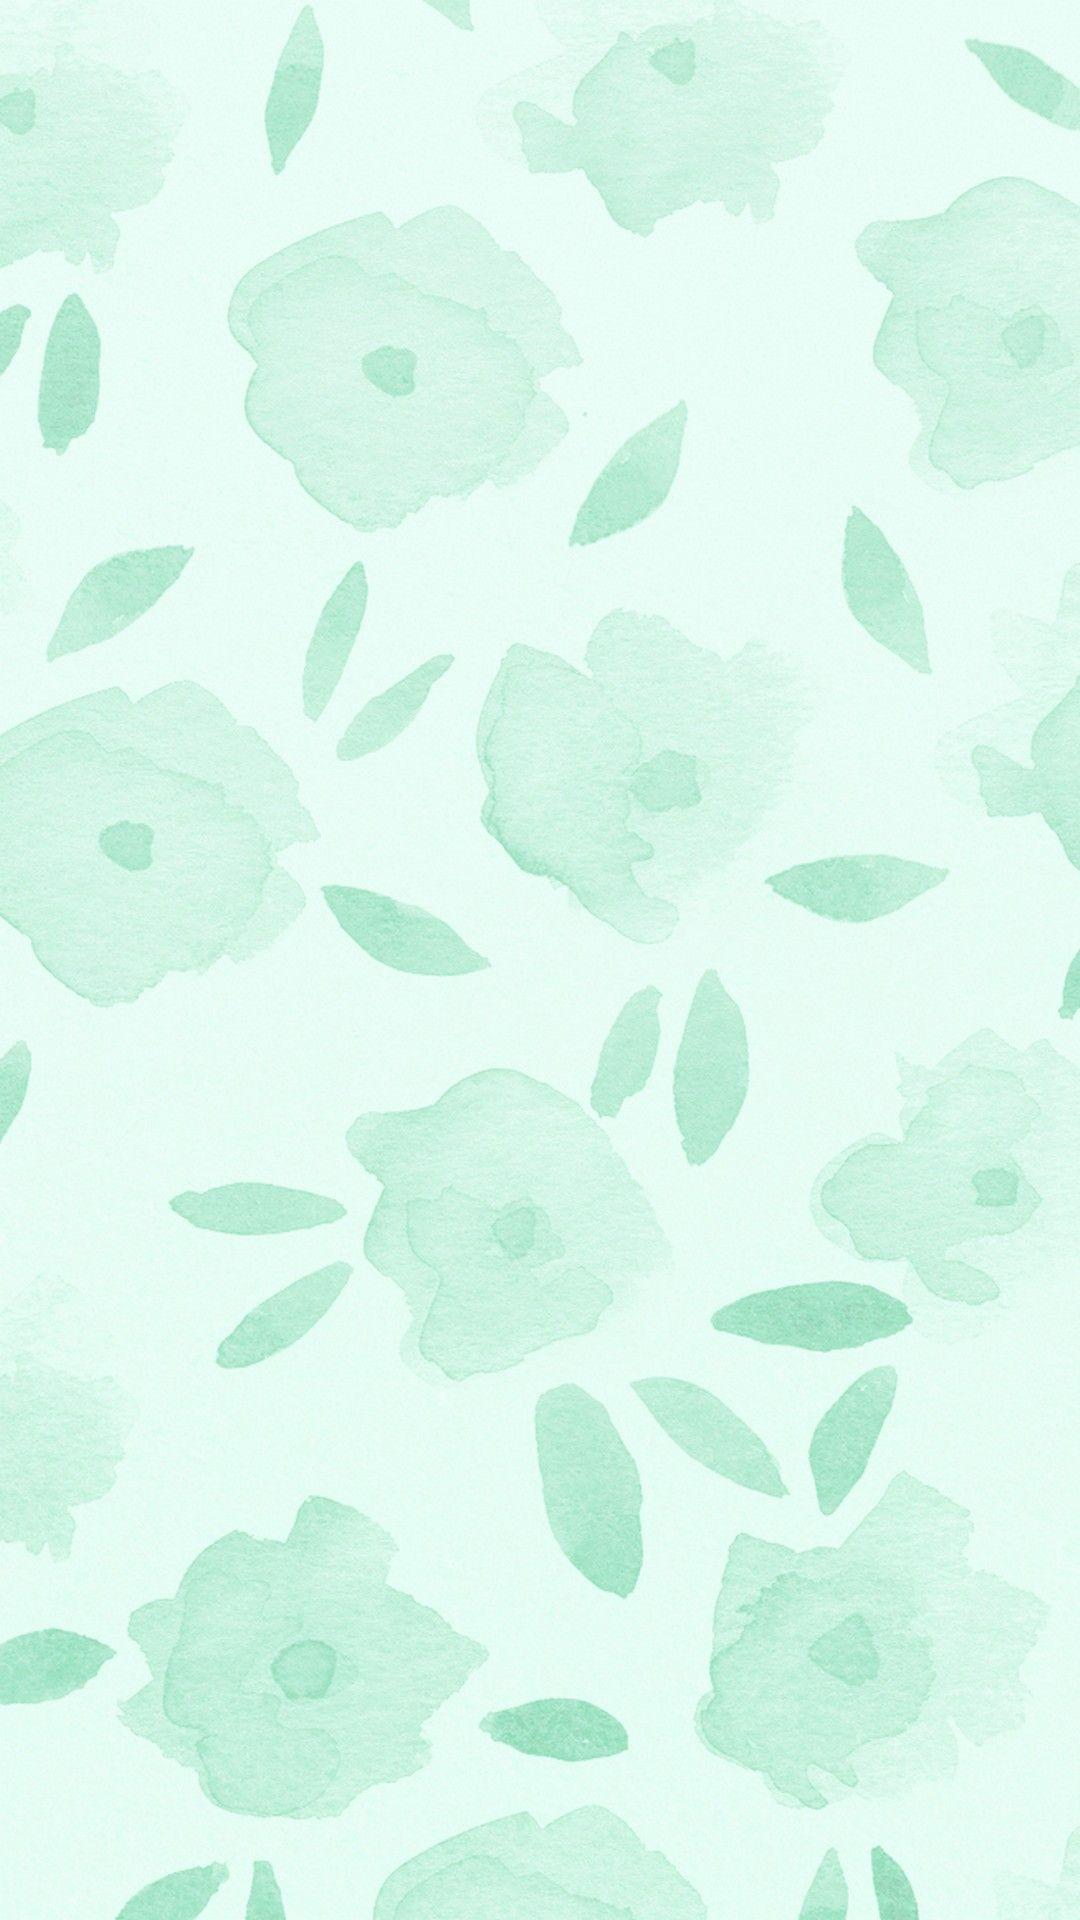 Mint Green and White Wallpapers - Top Free Mint Green and White ...